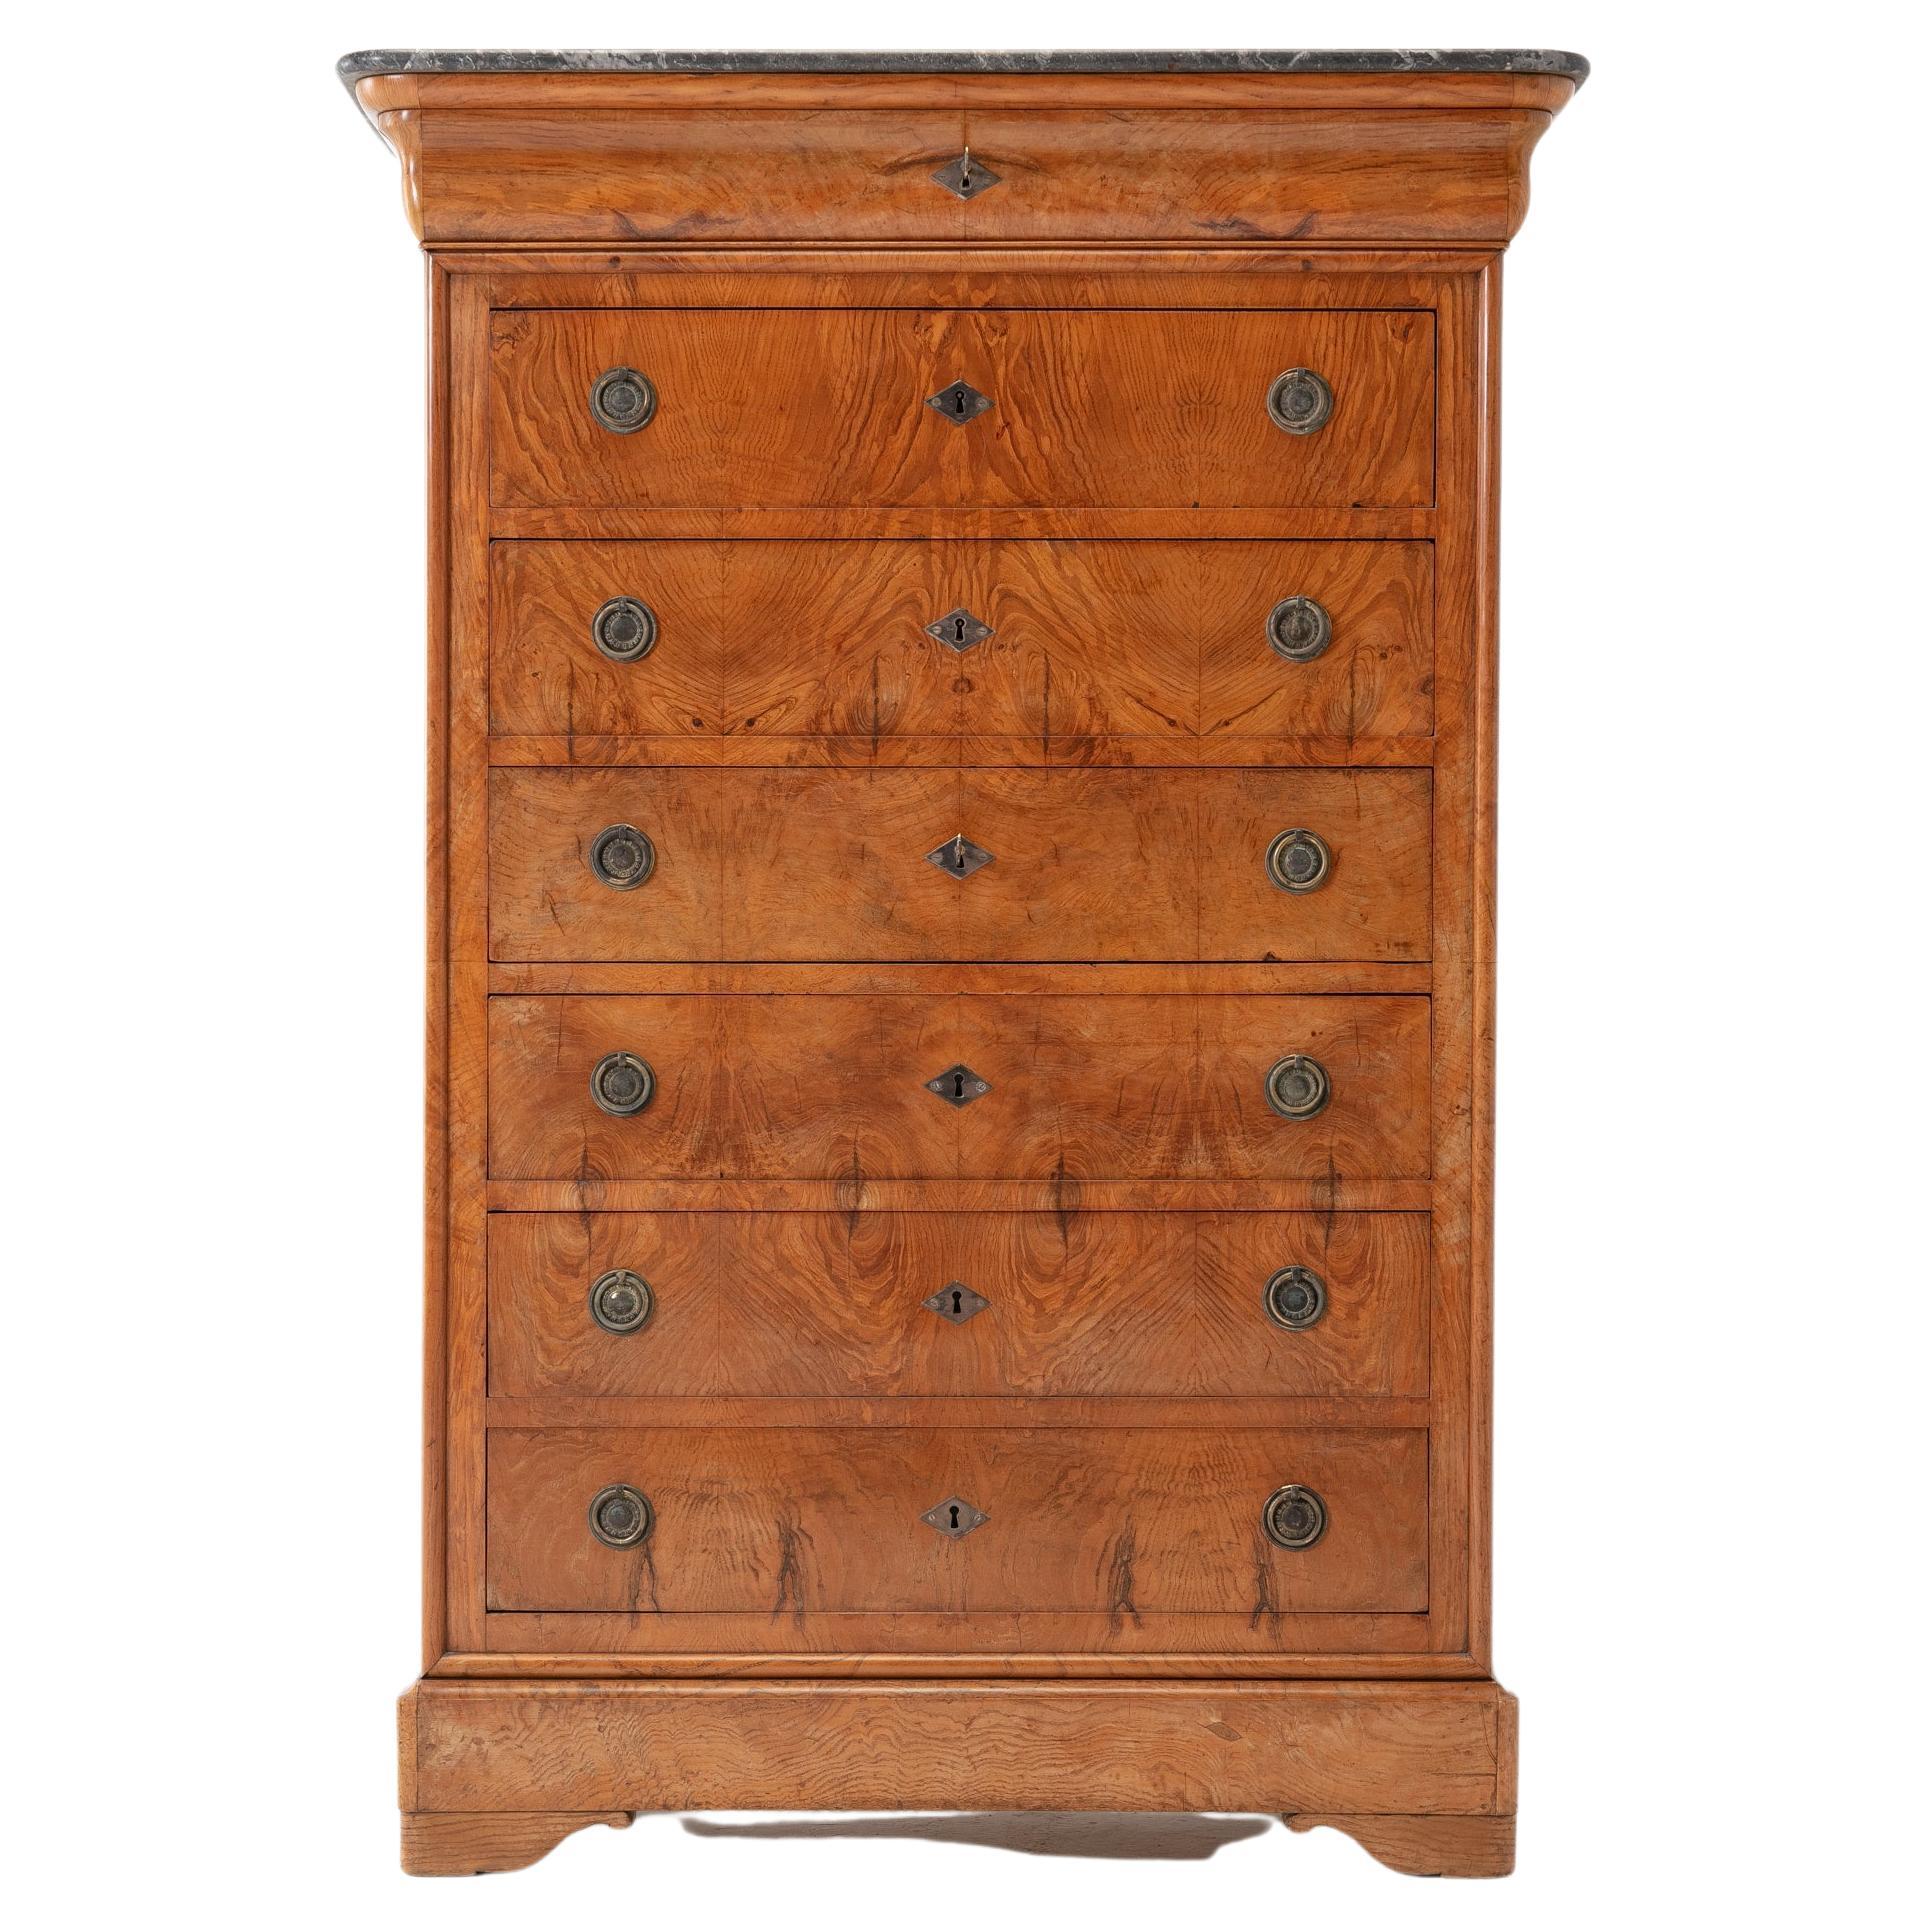 19th Century French Ash Semainier with Secrétaire Drawer